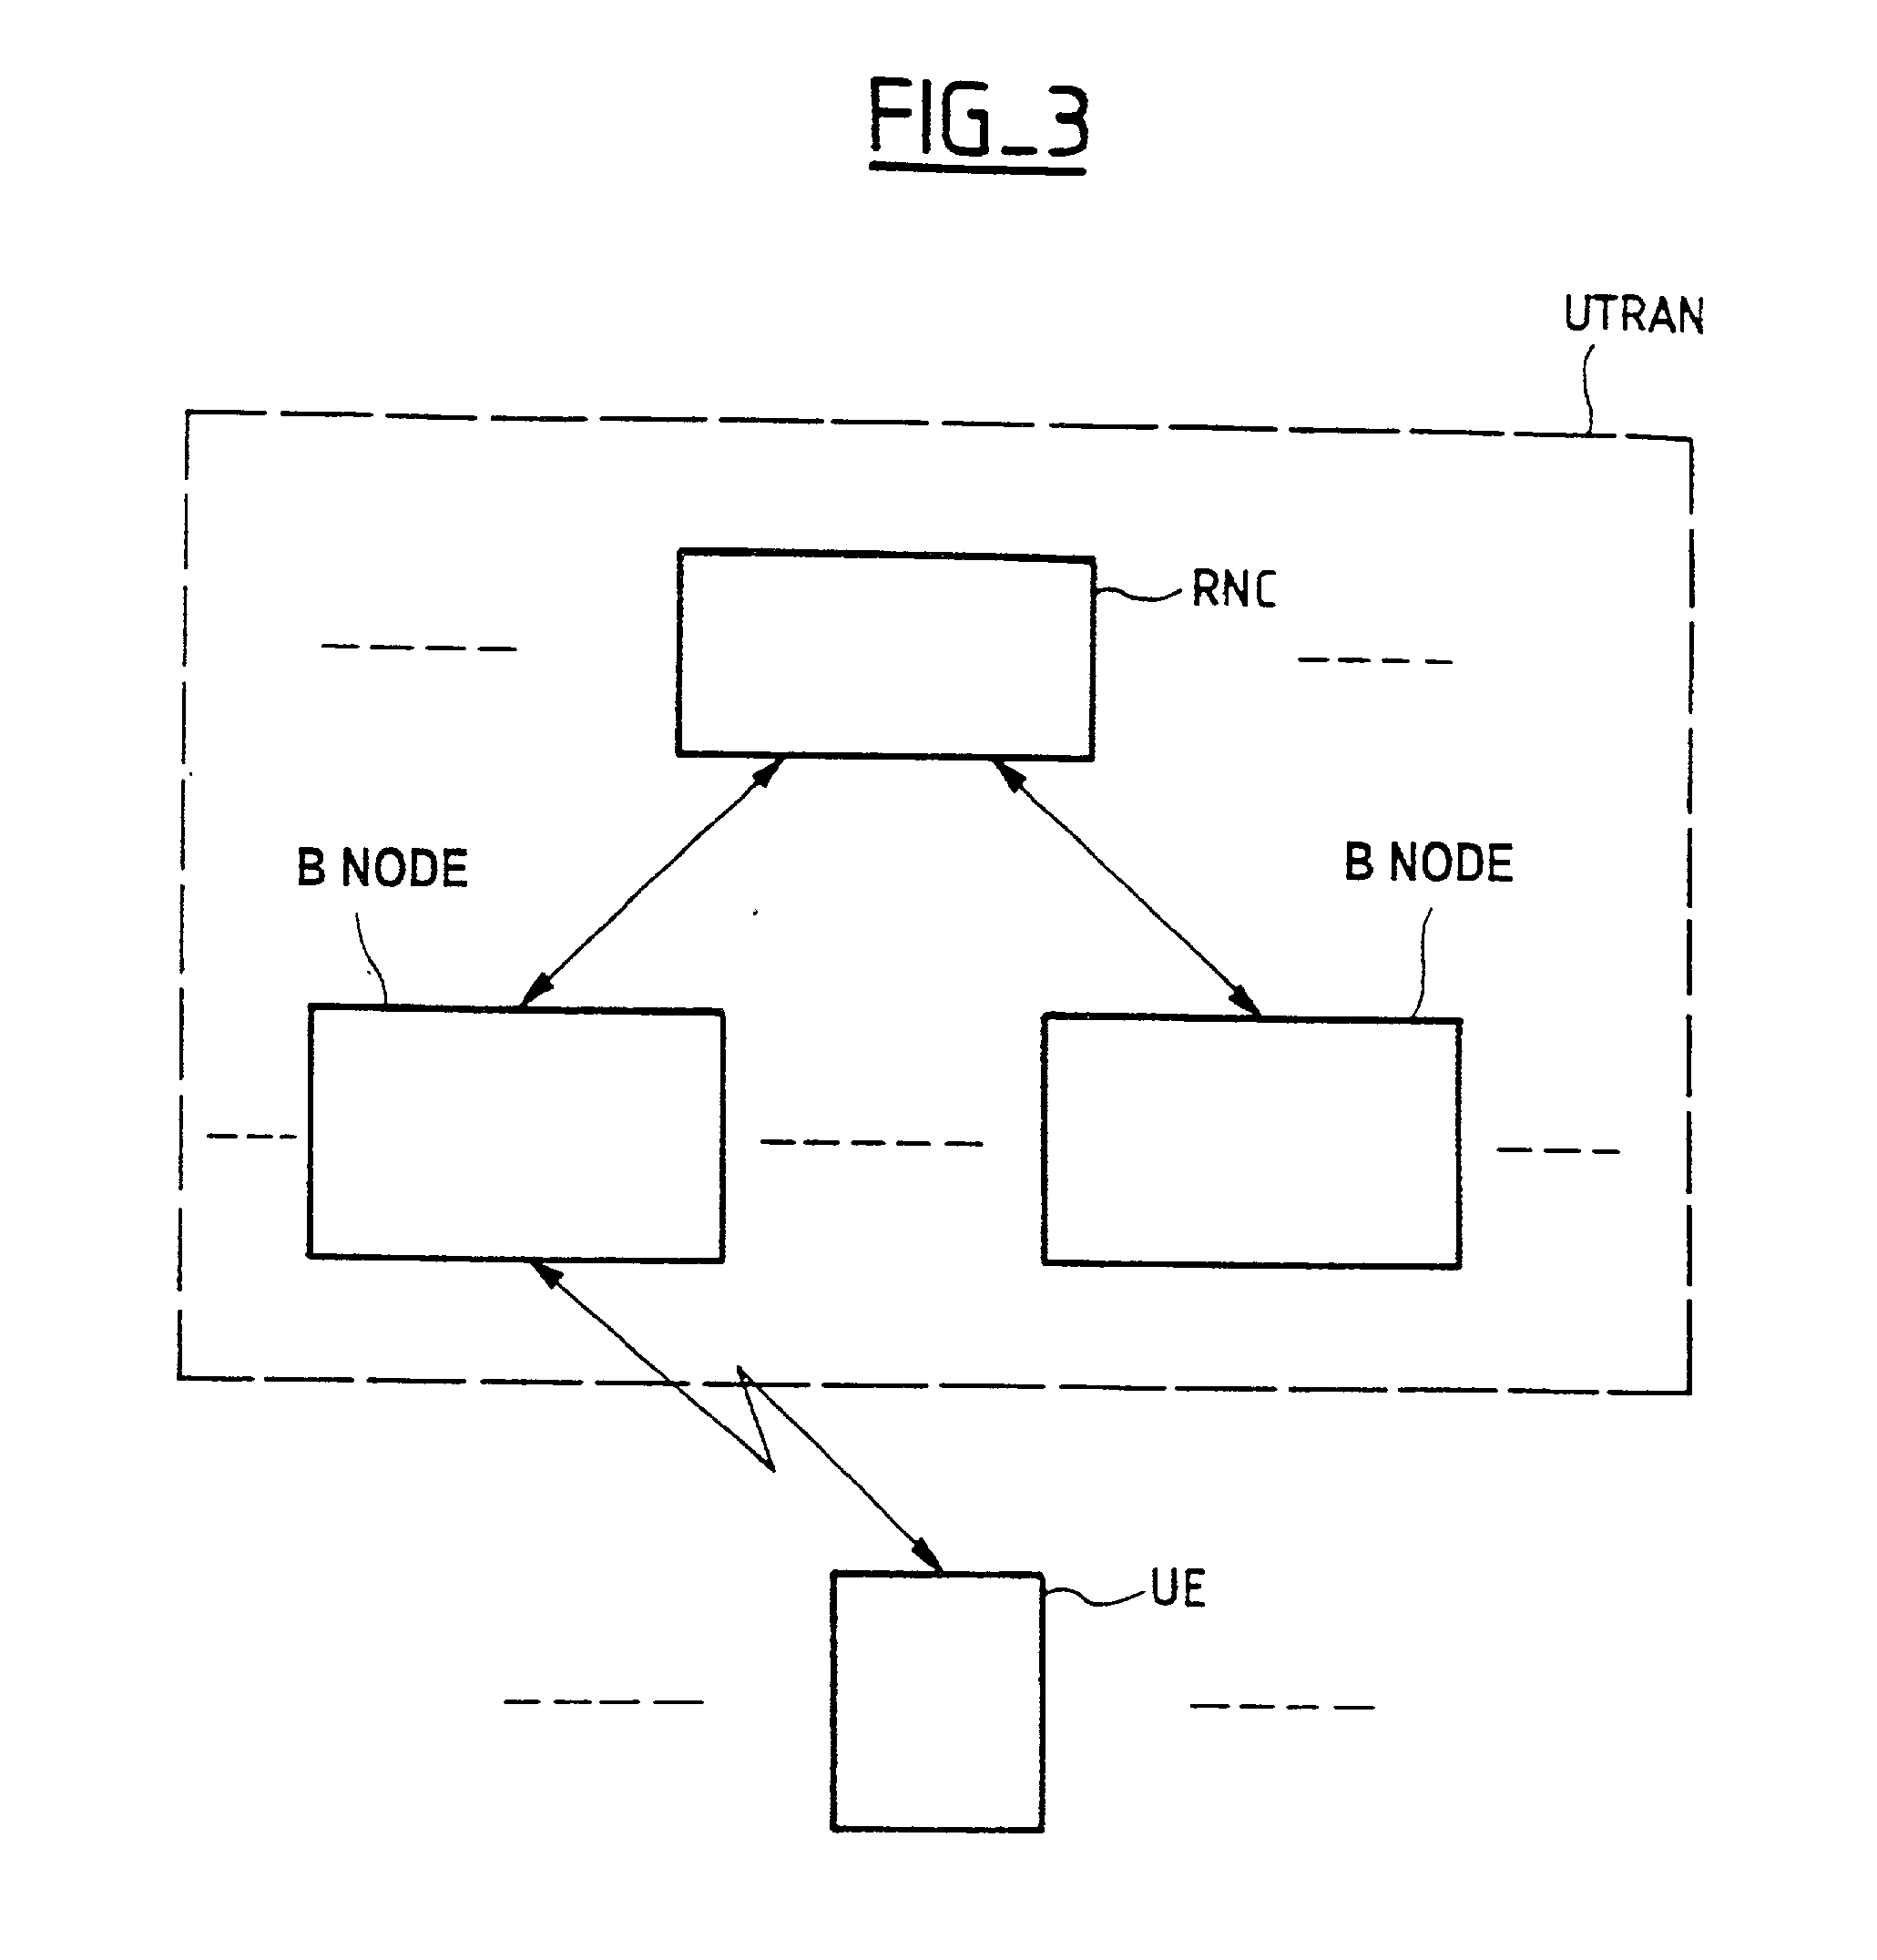 Method of controlling transmission power in a mobile radio system